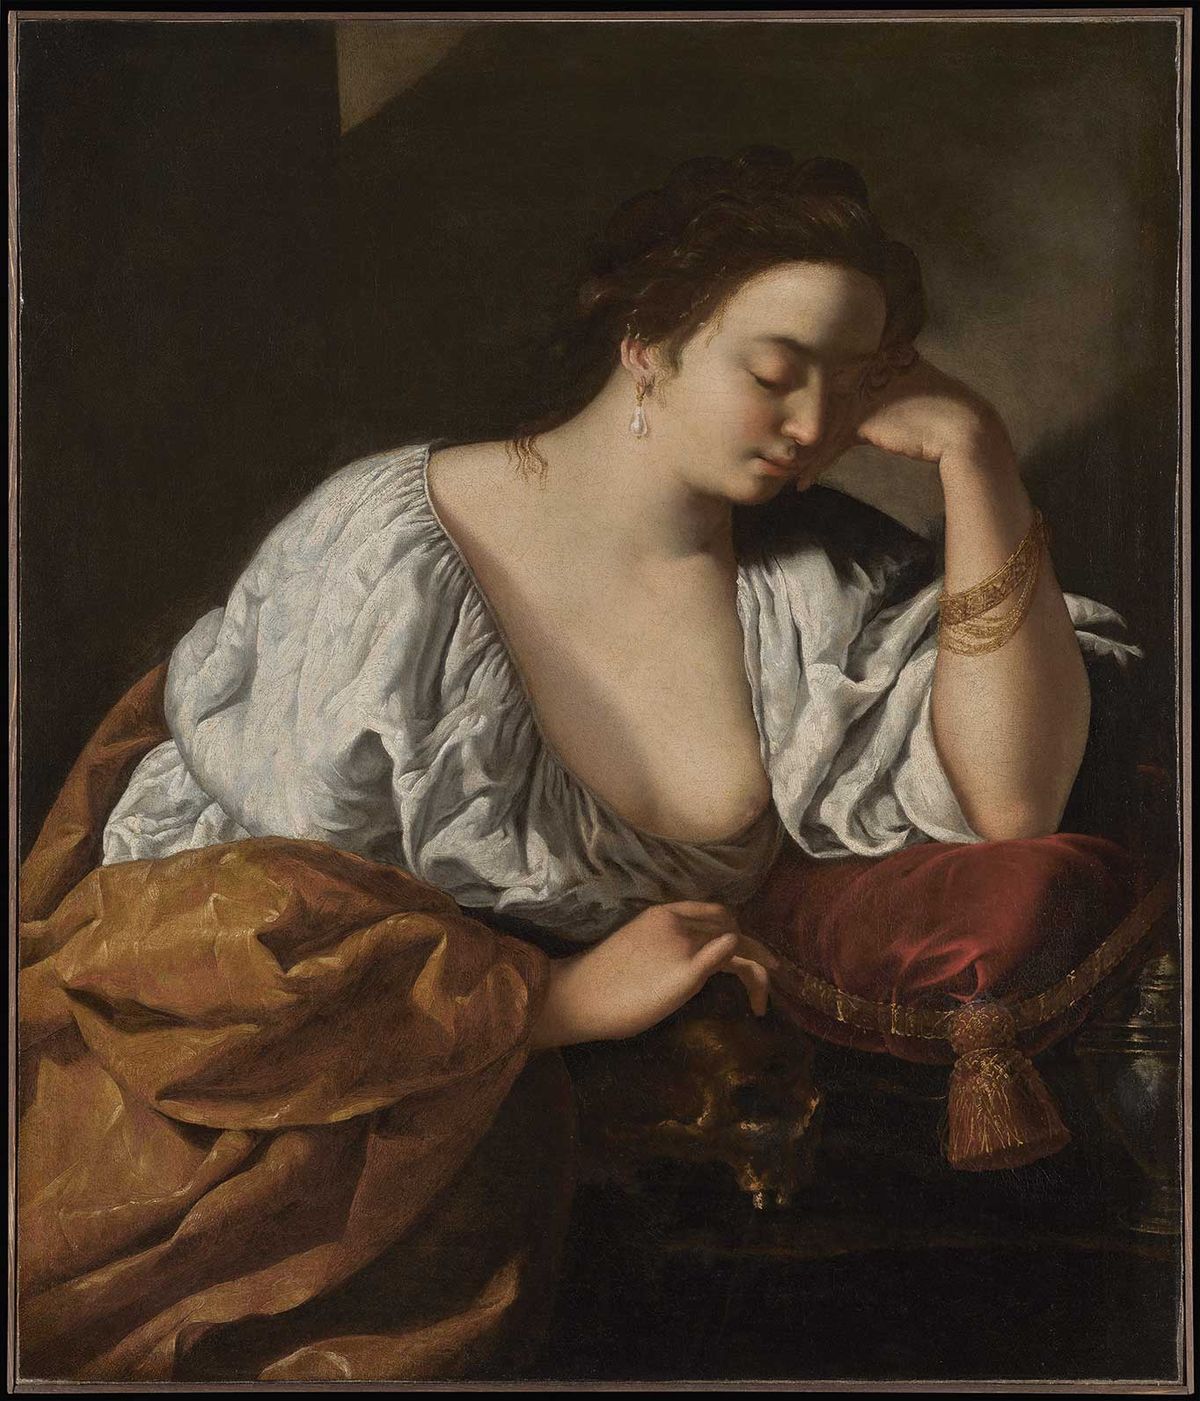 The recently rediscovered Penitent Magdalene (around 1626) by Artemisia Gentileschi is a standout attraction in the Old Master category, offered for sale at $7m by Robilant+Voena

Courtesy Robilant+Voena





